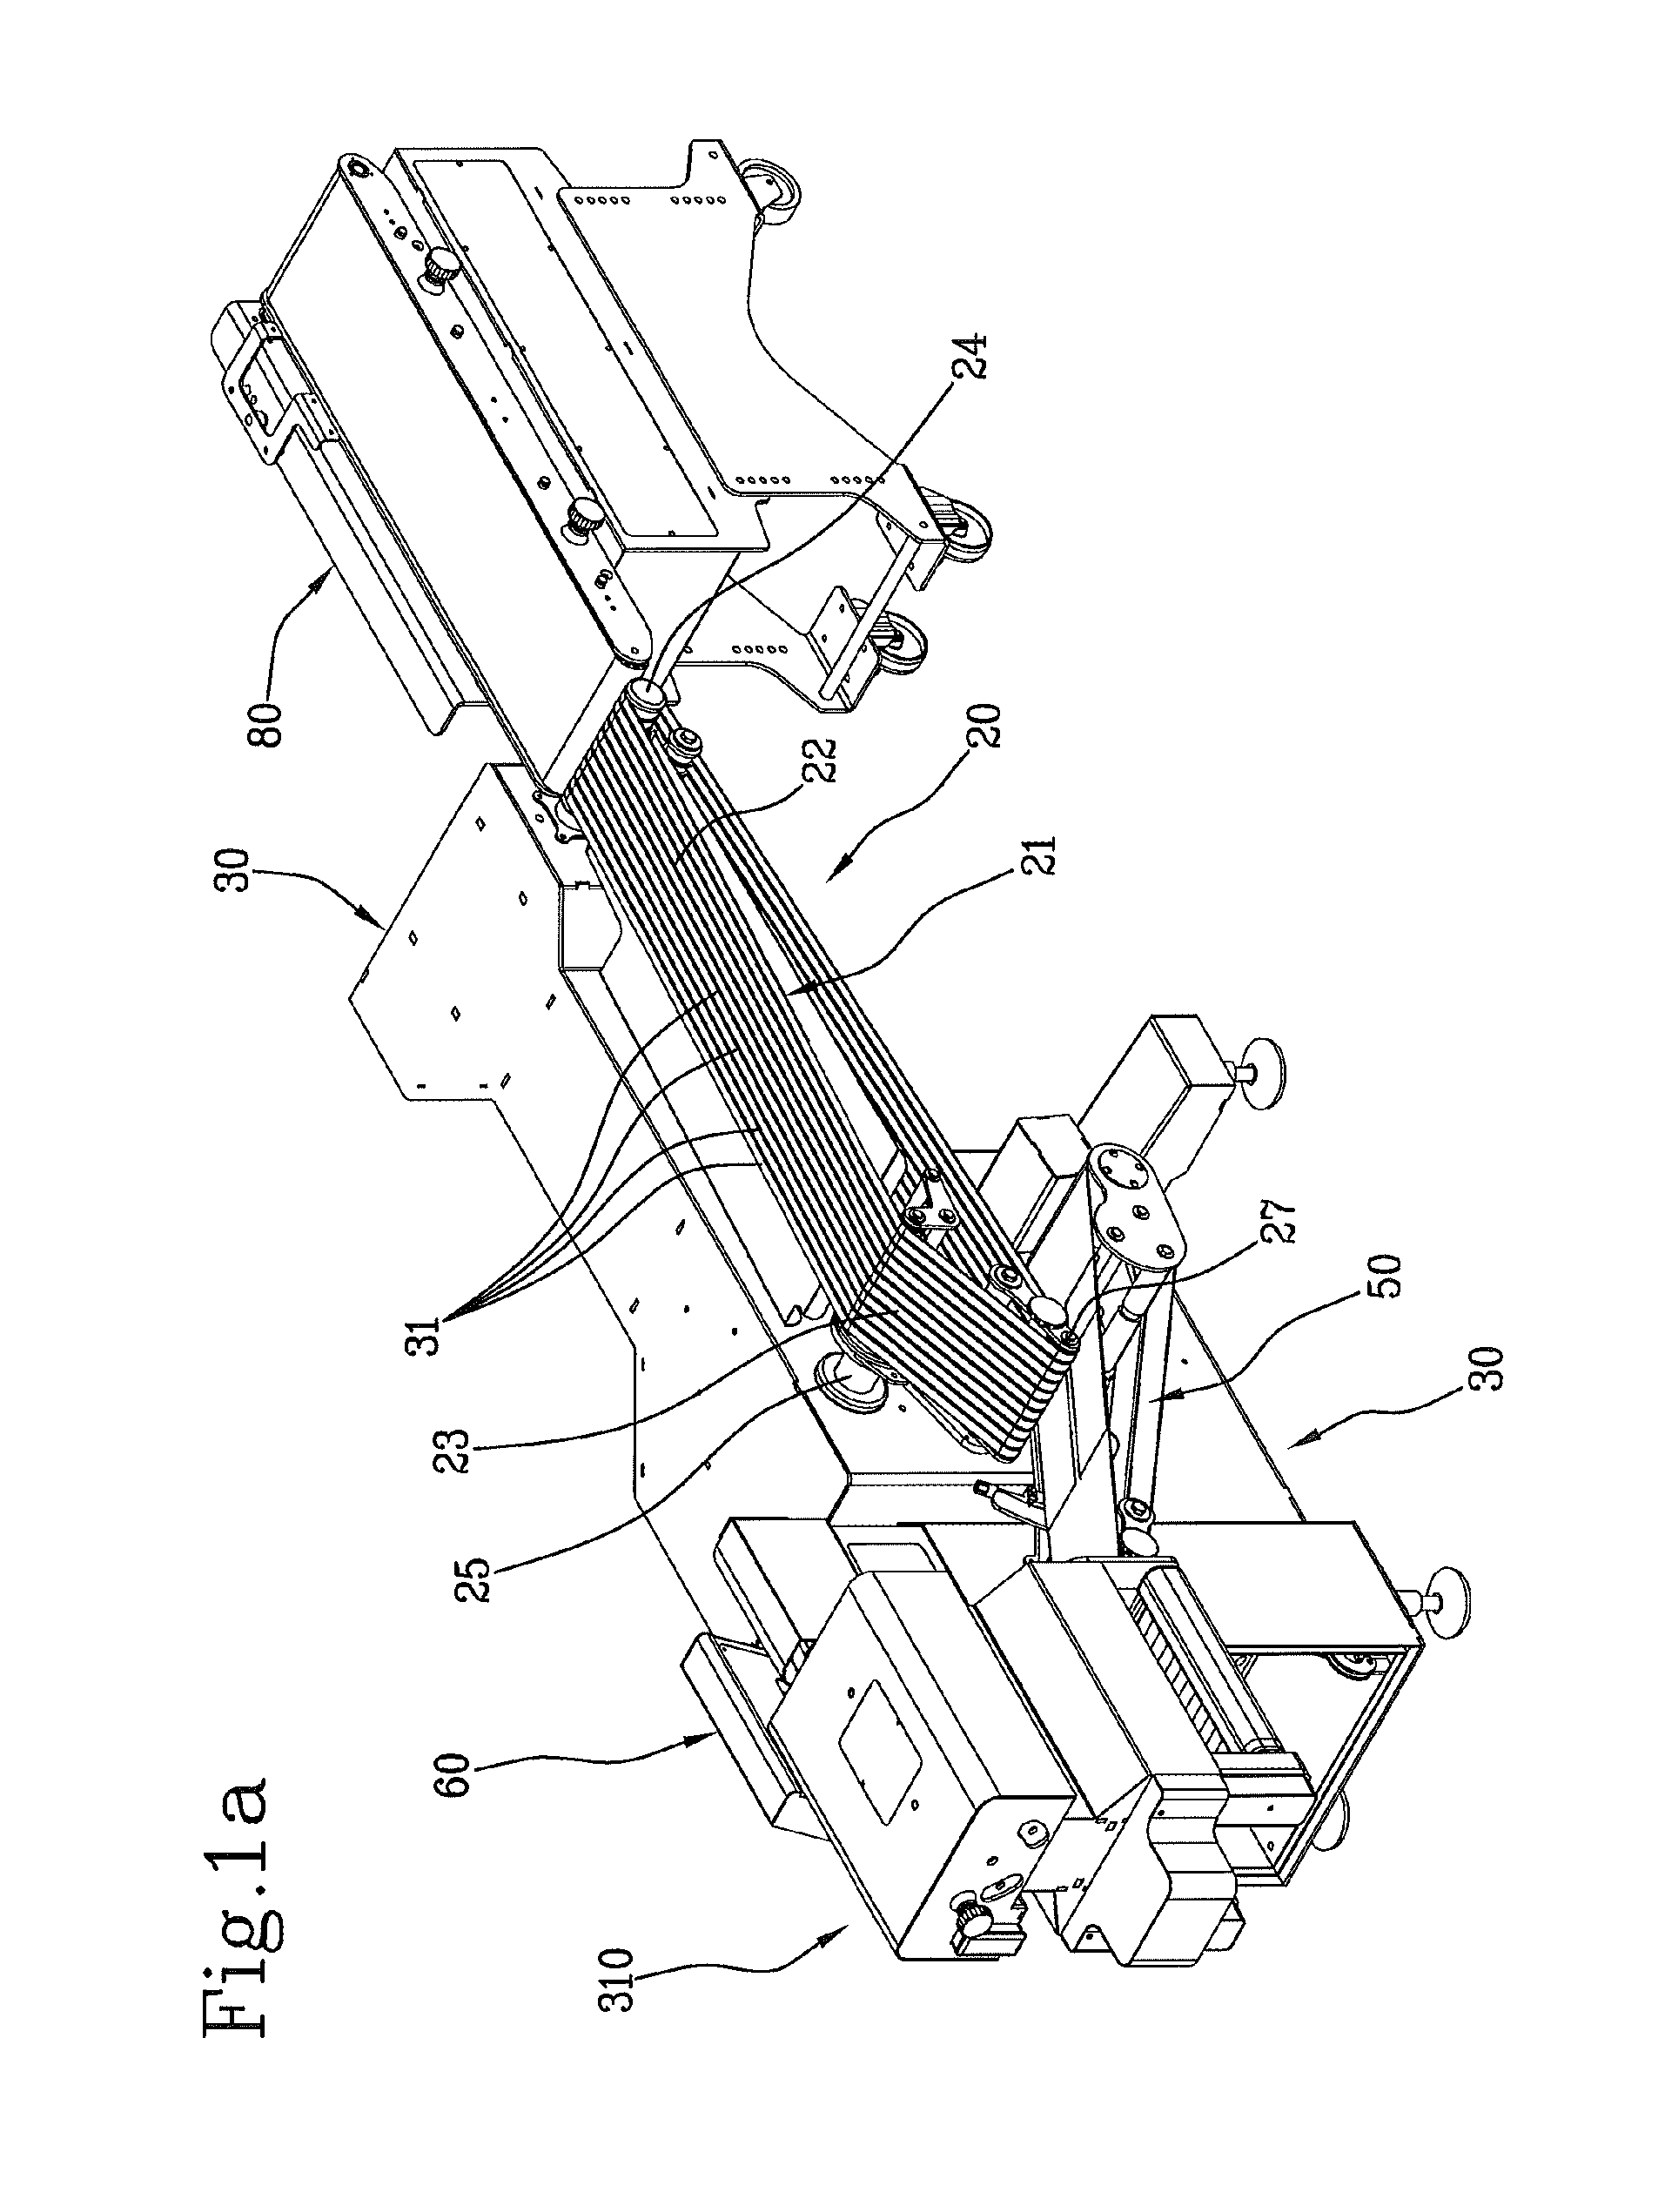 Apparatus for laying sliced foods into containers